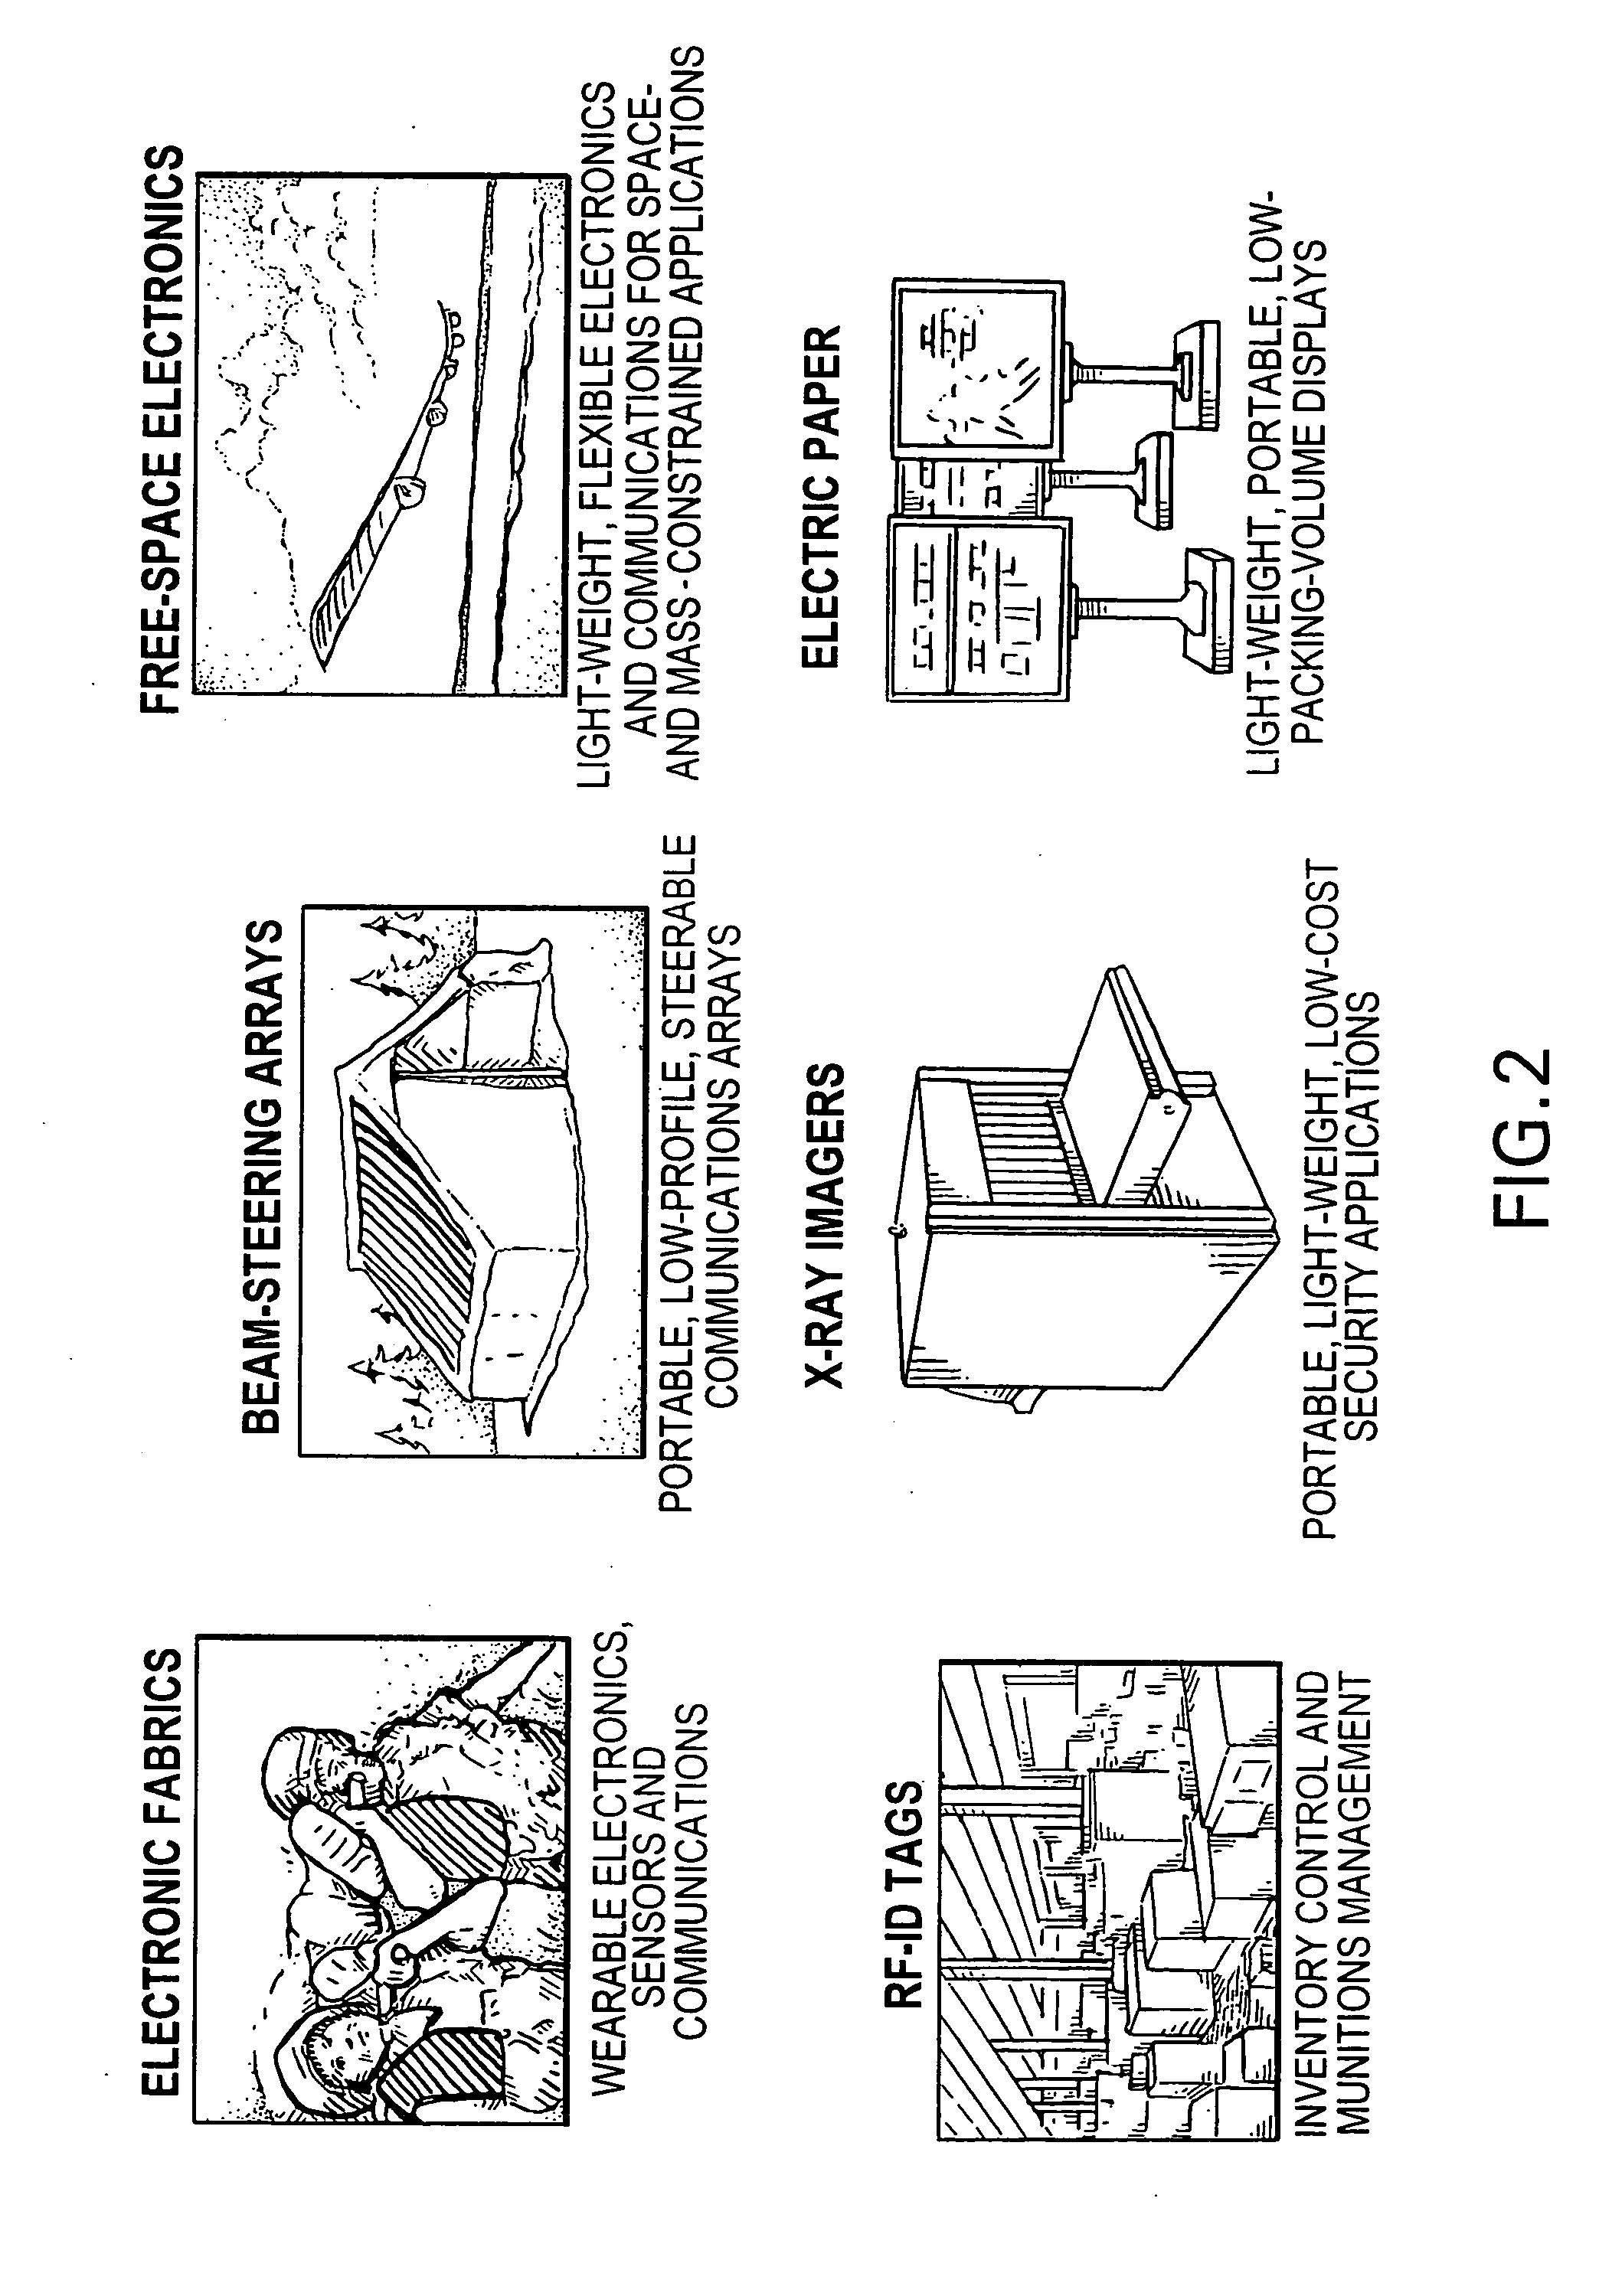 Phased array systems and methods